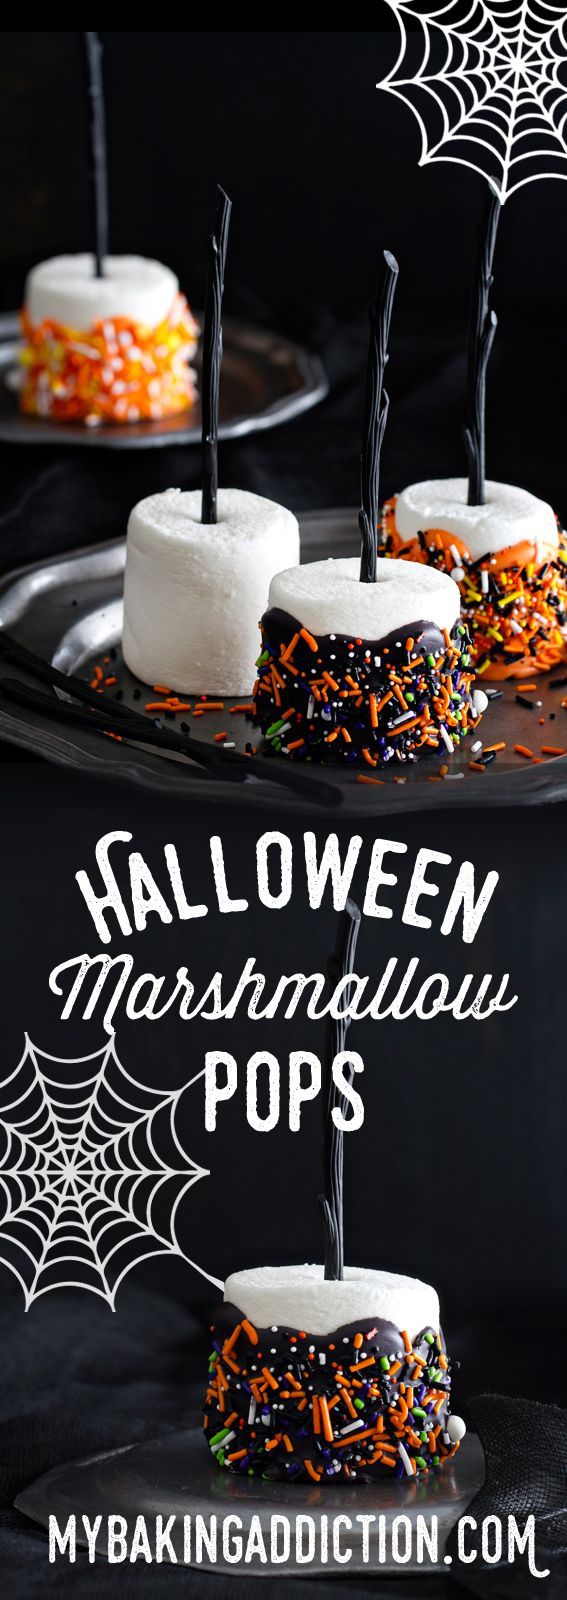 Halloween Marshmallow Pops are the handheld treat you want at your Halloween party. They’re simple and